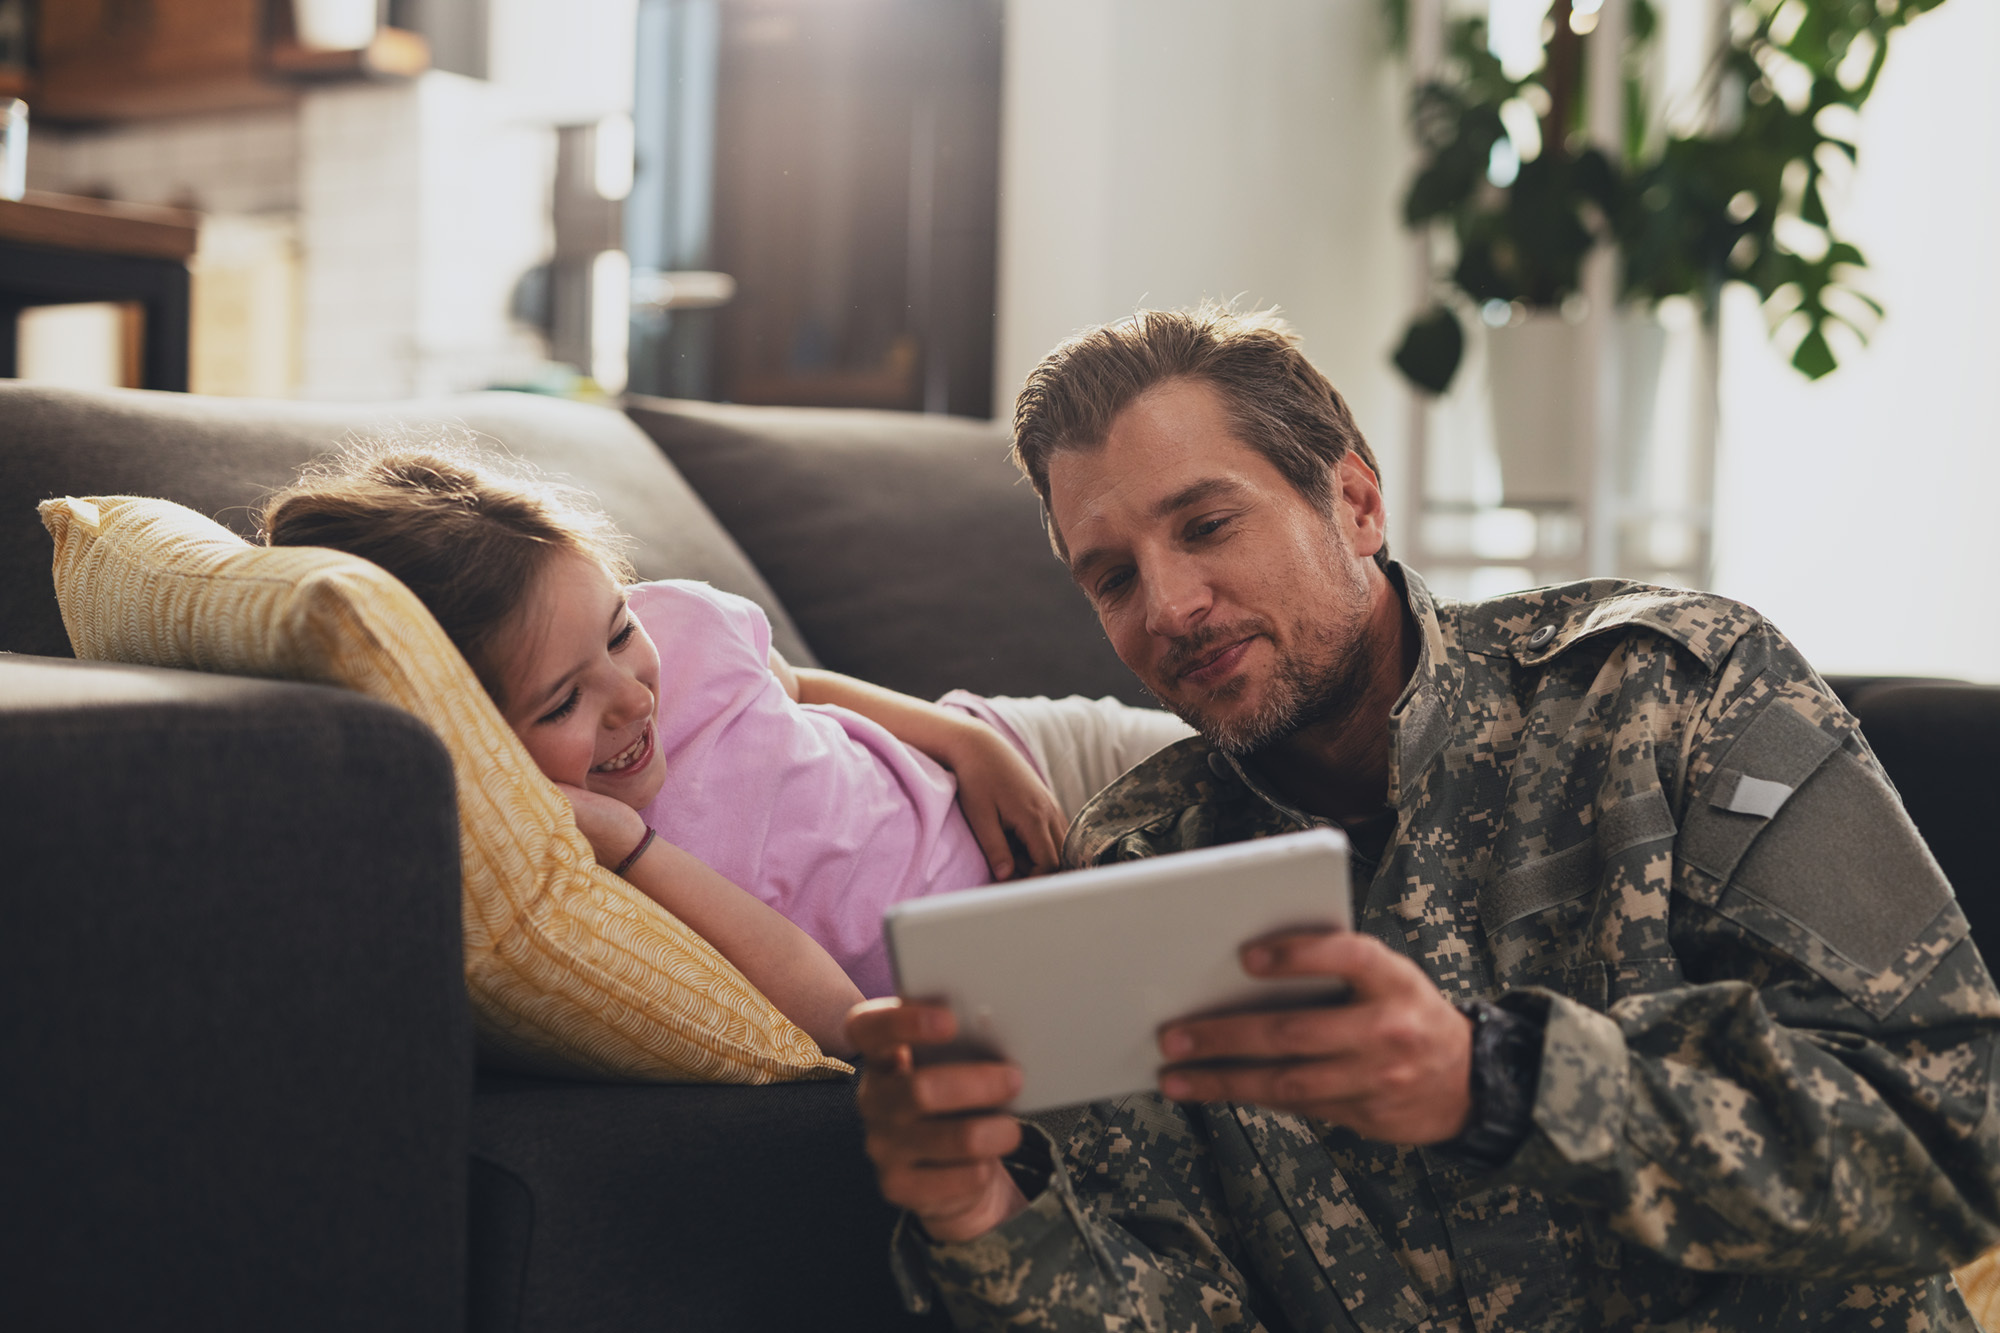 Father in military uniform on tablet with daughter